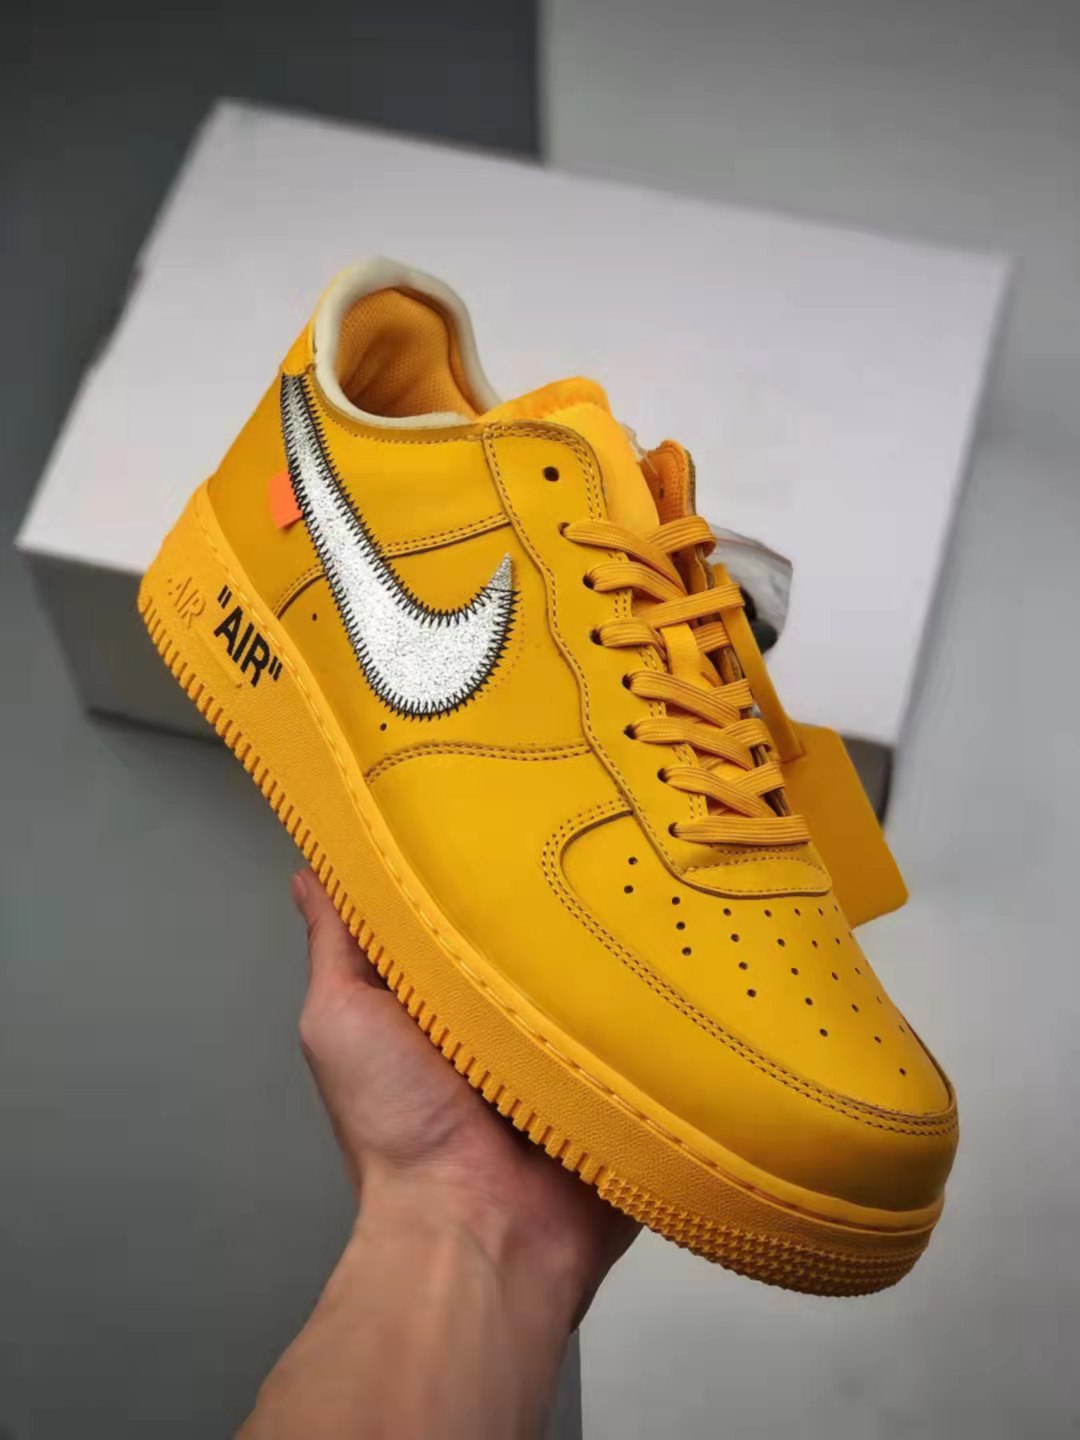 Nike Off-White x Air Force 1 Low 'Lemonade' DD1876-700 - Exclusive Sneaker Collaboration